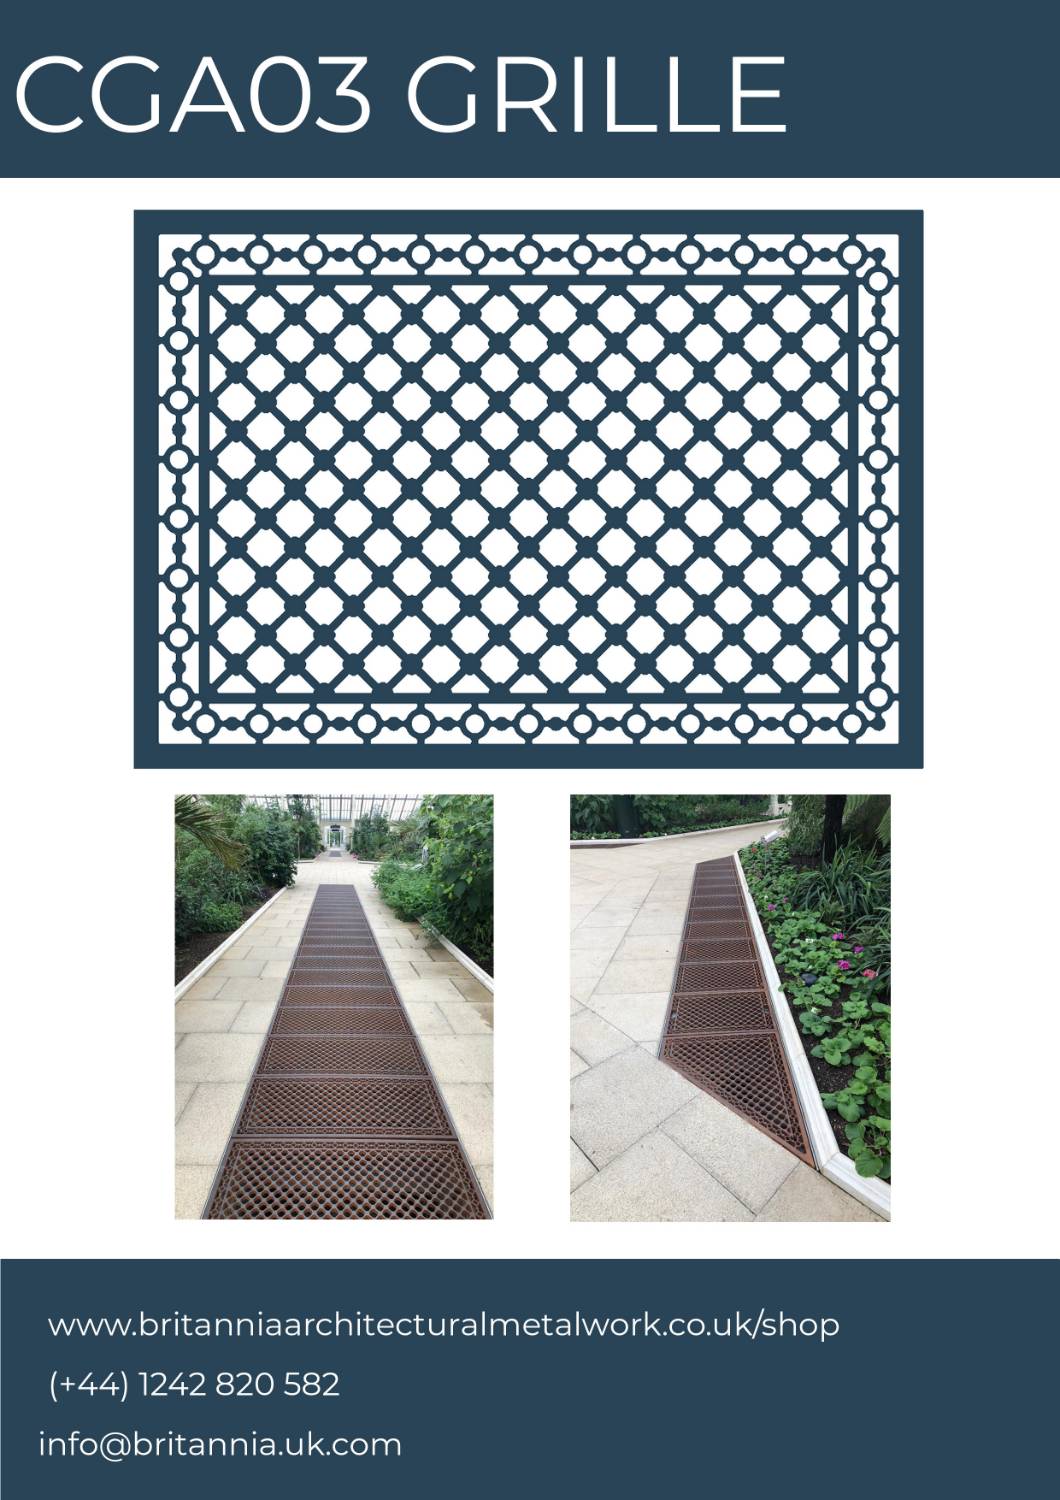 Cast iron and aluminium ventilation grilles and gratings. Decorative floor and wall heating vent. CGA03 Grille.